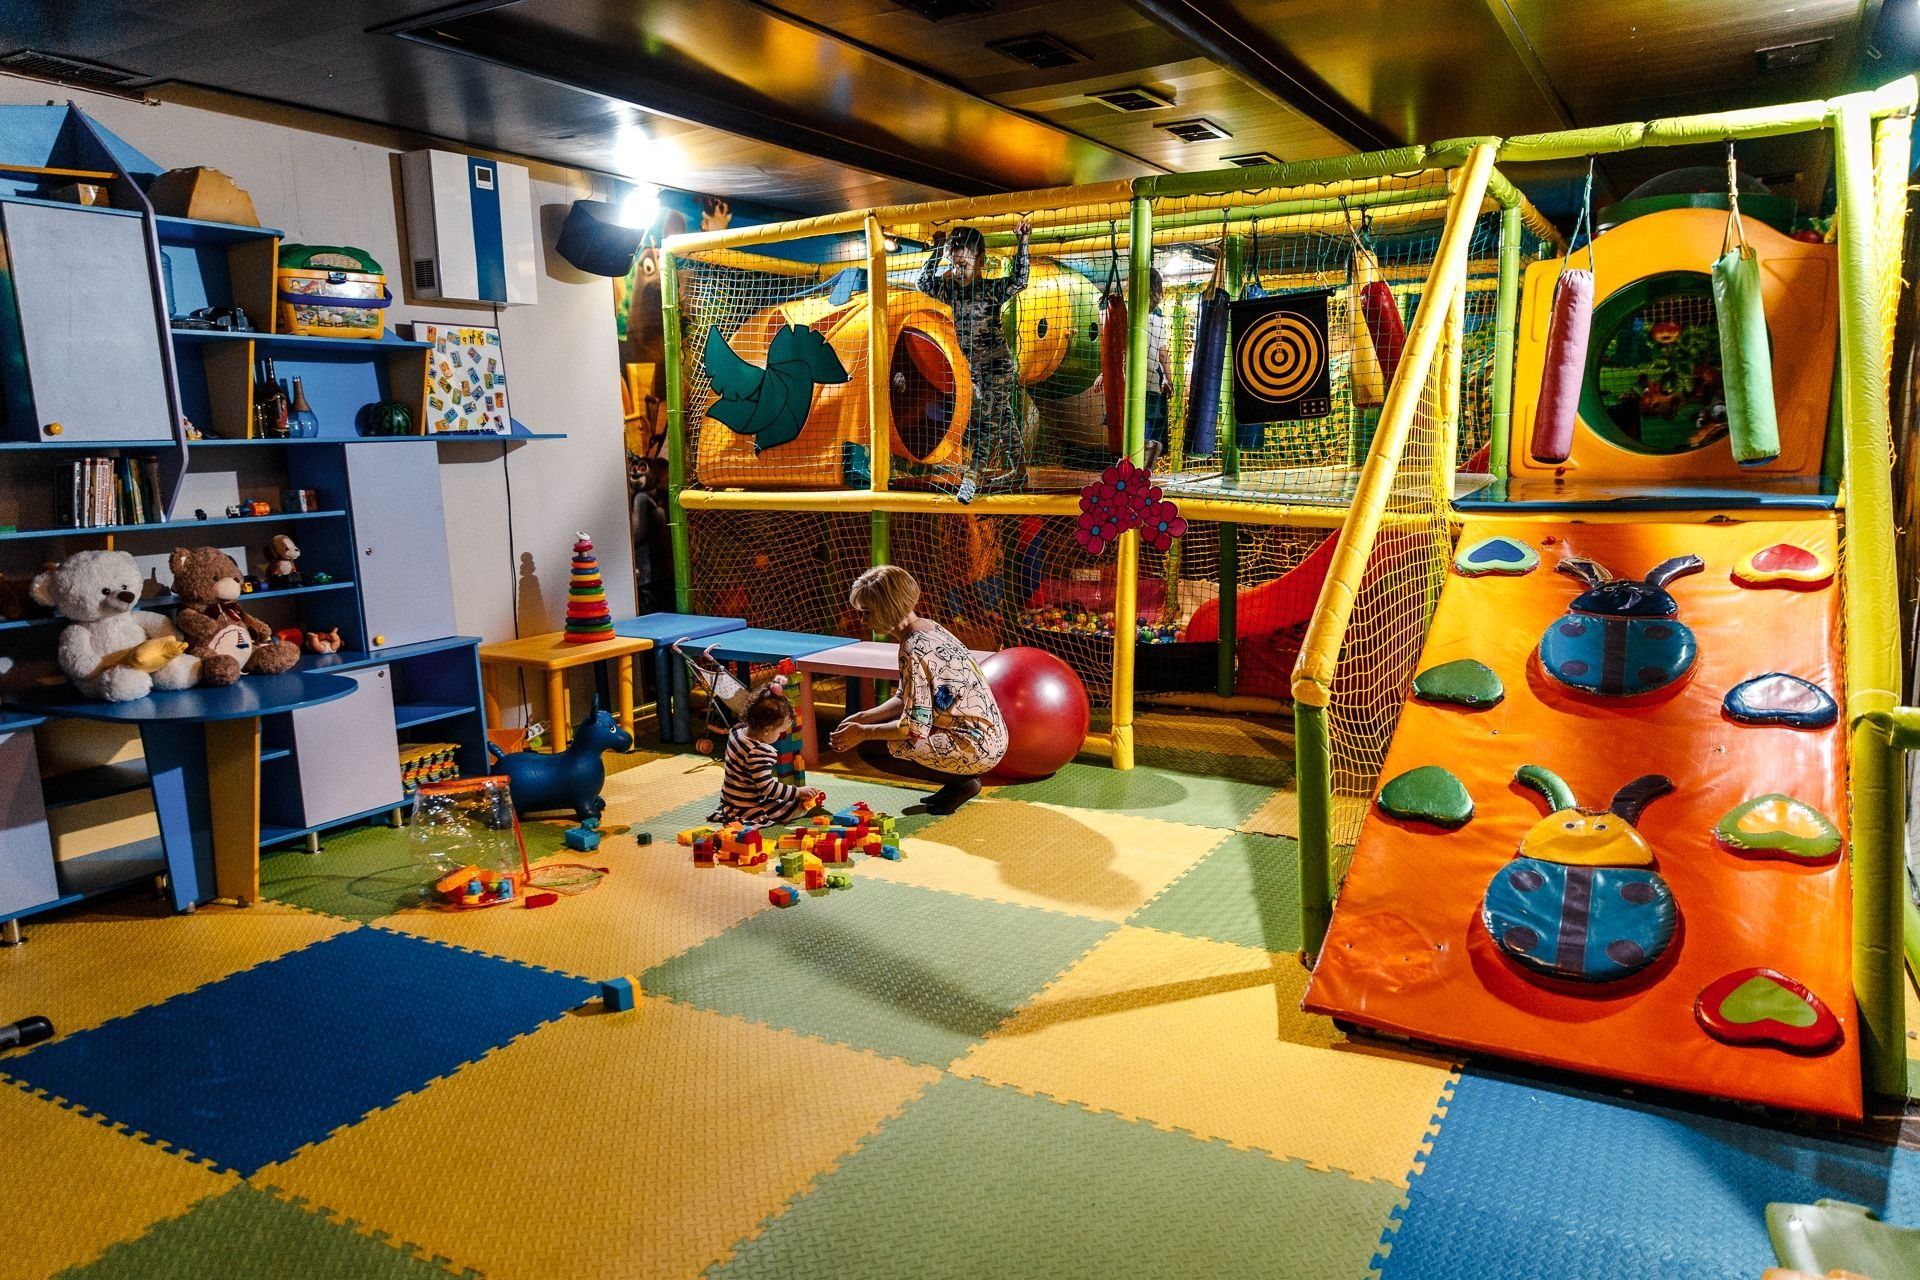 The best cafes and restaurants with a children's room in Moscow in 2022